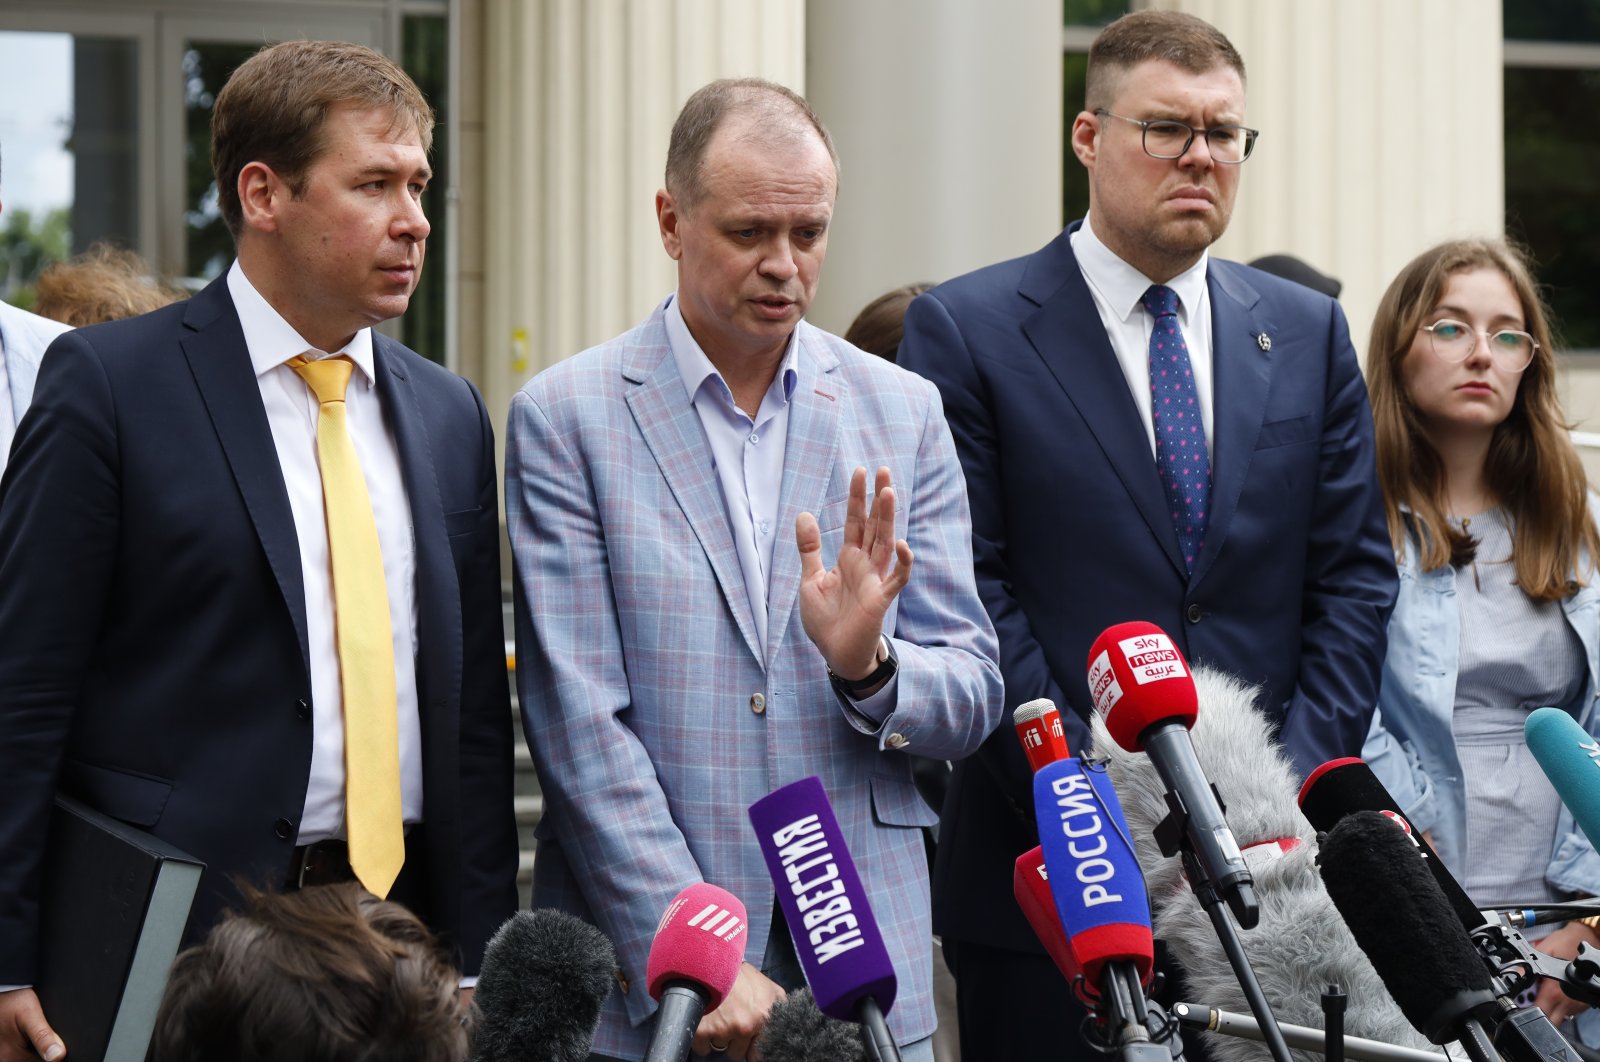 Russian lawyer Ivan Pavlov (C), gestures while speaking to the media as other lawyers stand around him during a break in a court session in front of Moscow Court, in Moscow, Russia, June 9, 2021. (AP Photo)